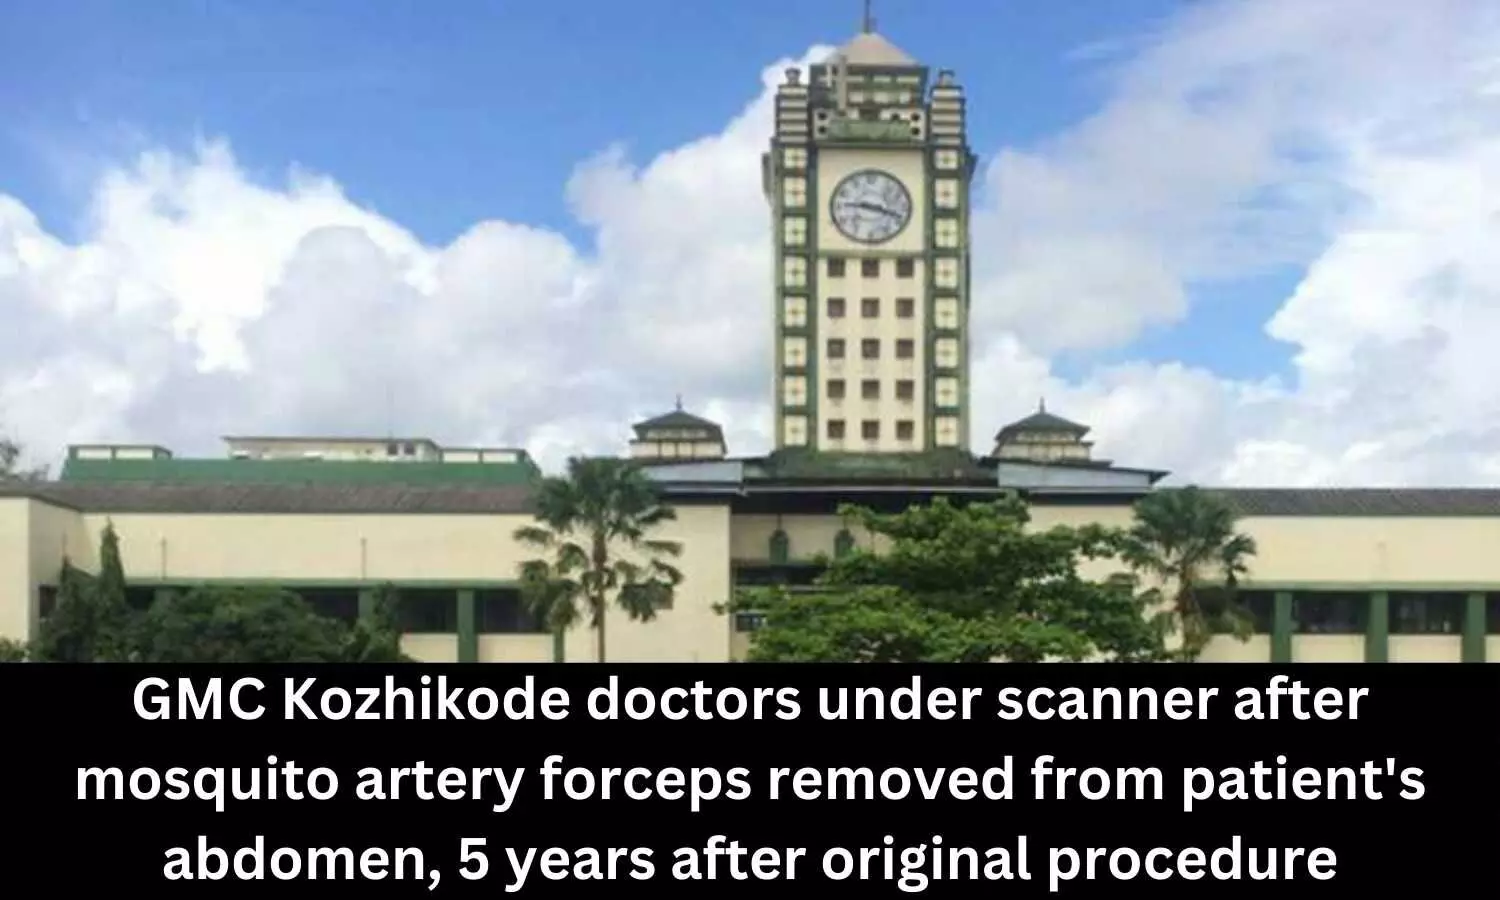 GMC Kozhikode doctors under scanner after mosquito artery forceps removed from patients abdomen, 5 years after original procedure